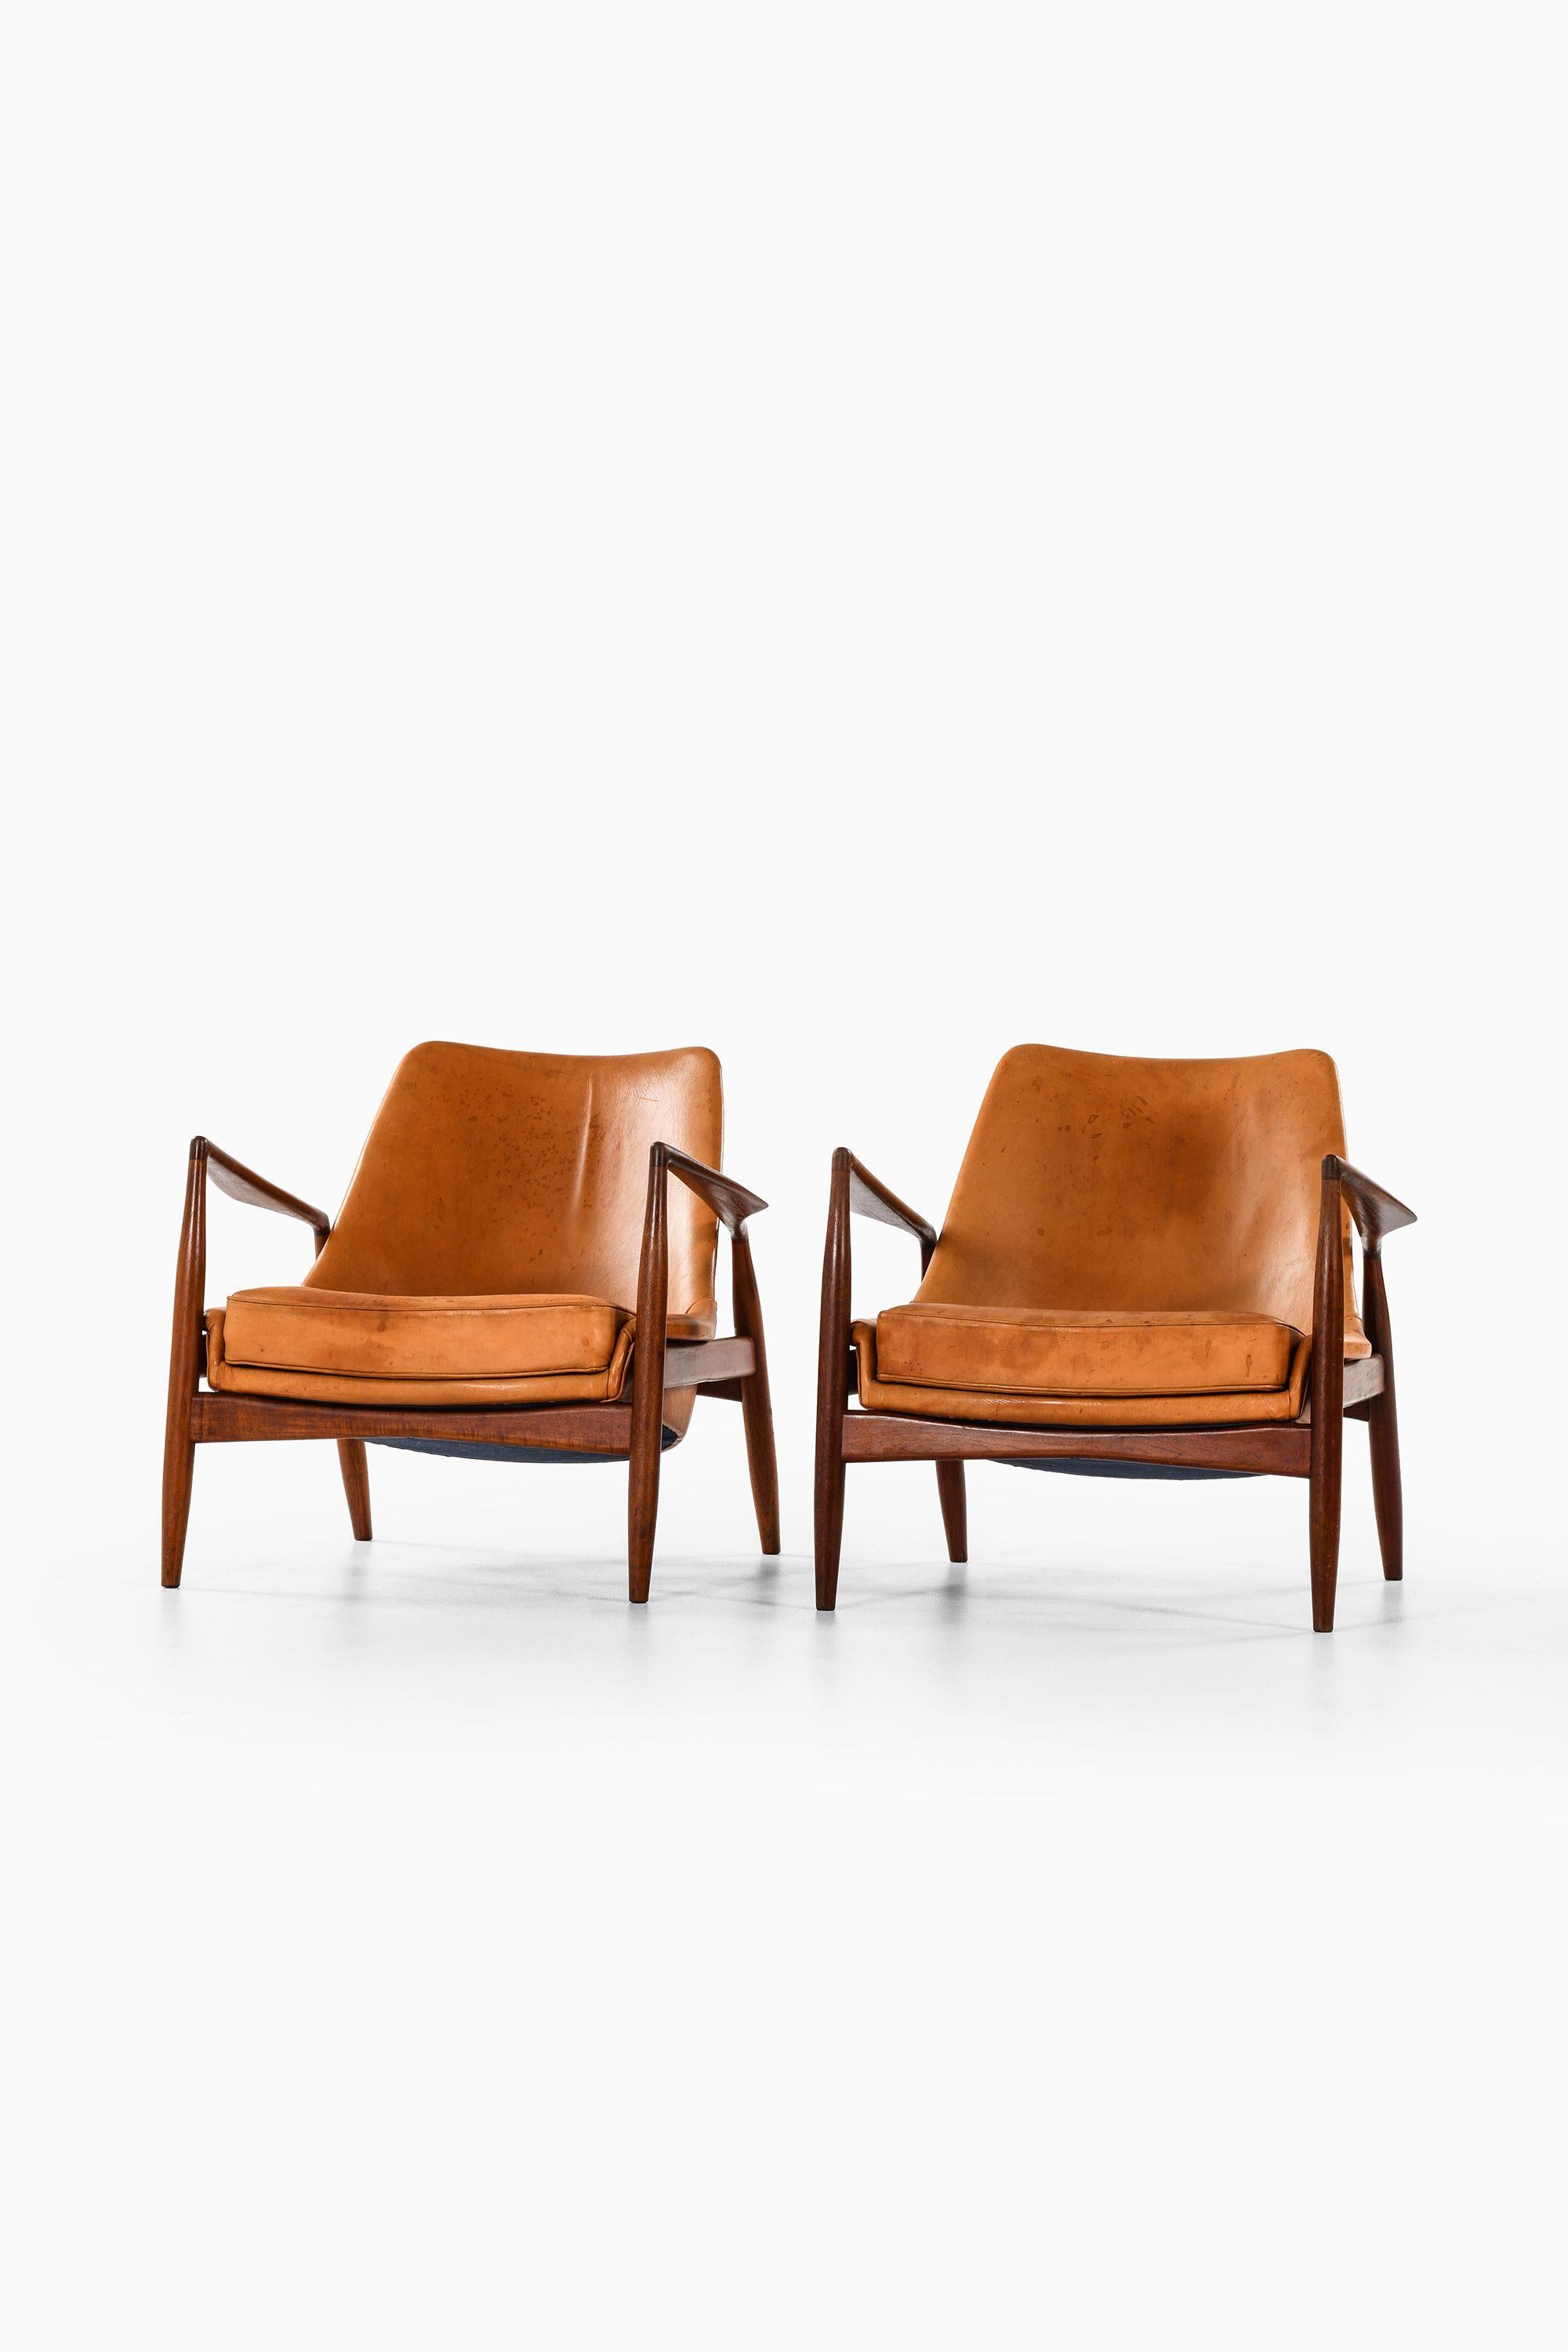 Scandinavian Modern Pair of Easy Chairs in Teak and Leather by Ib Kofod-Larsen, 1950s For Sale